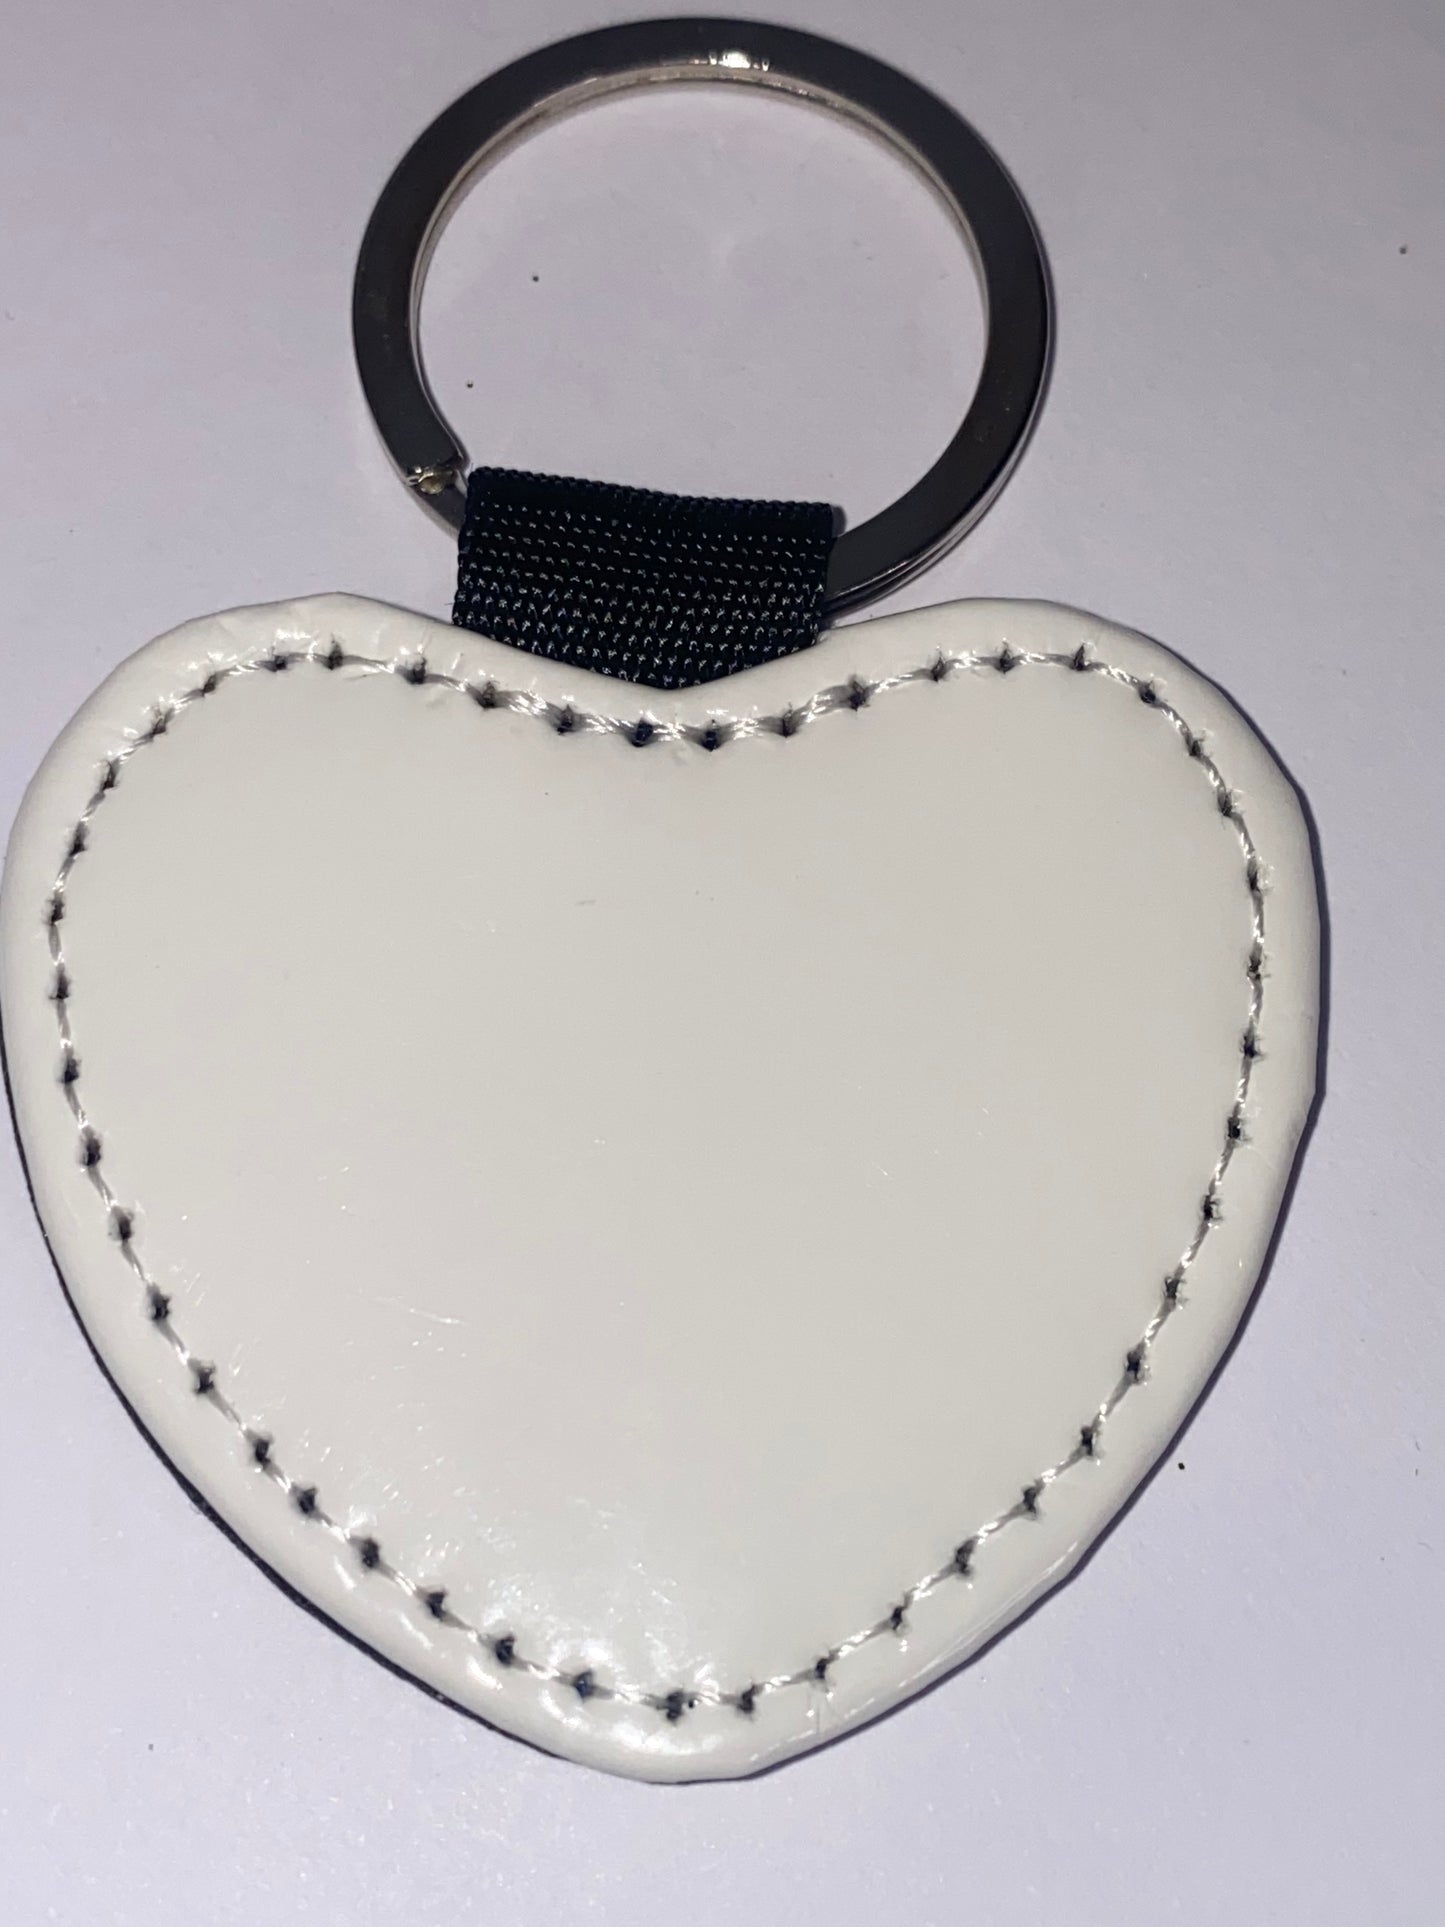 Glitter Key Ring Sublimation - Red Heart